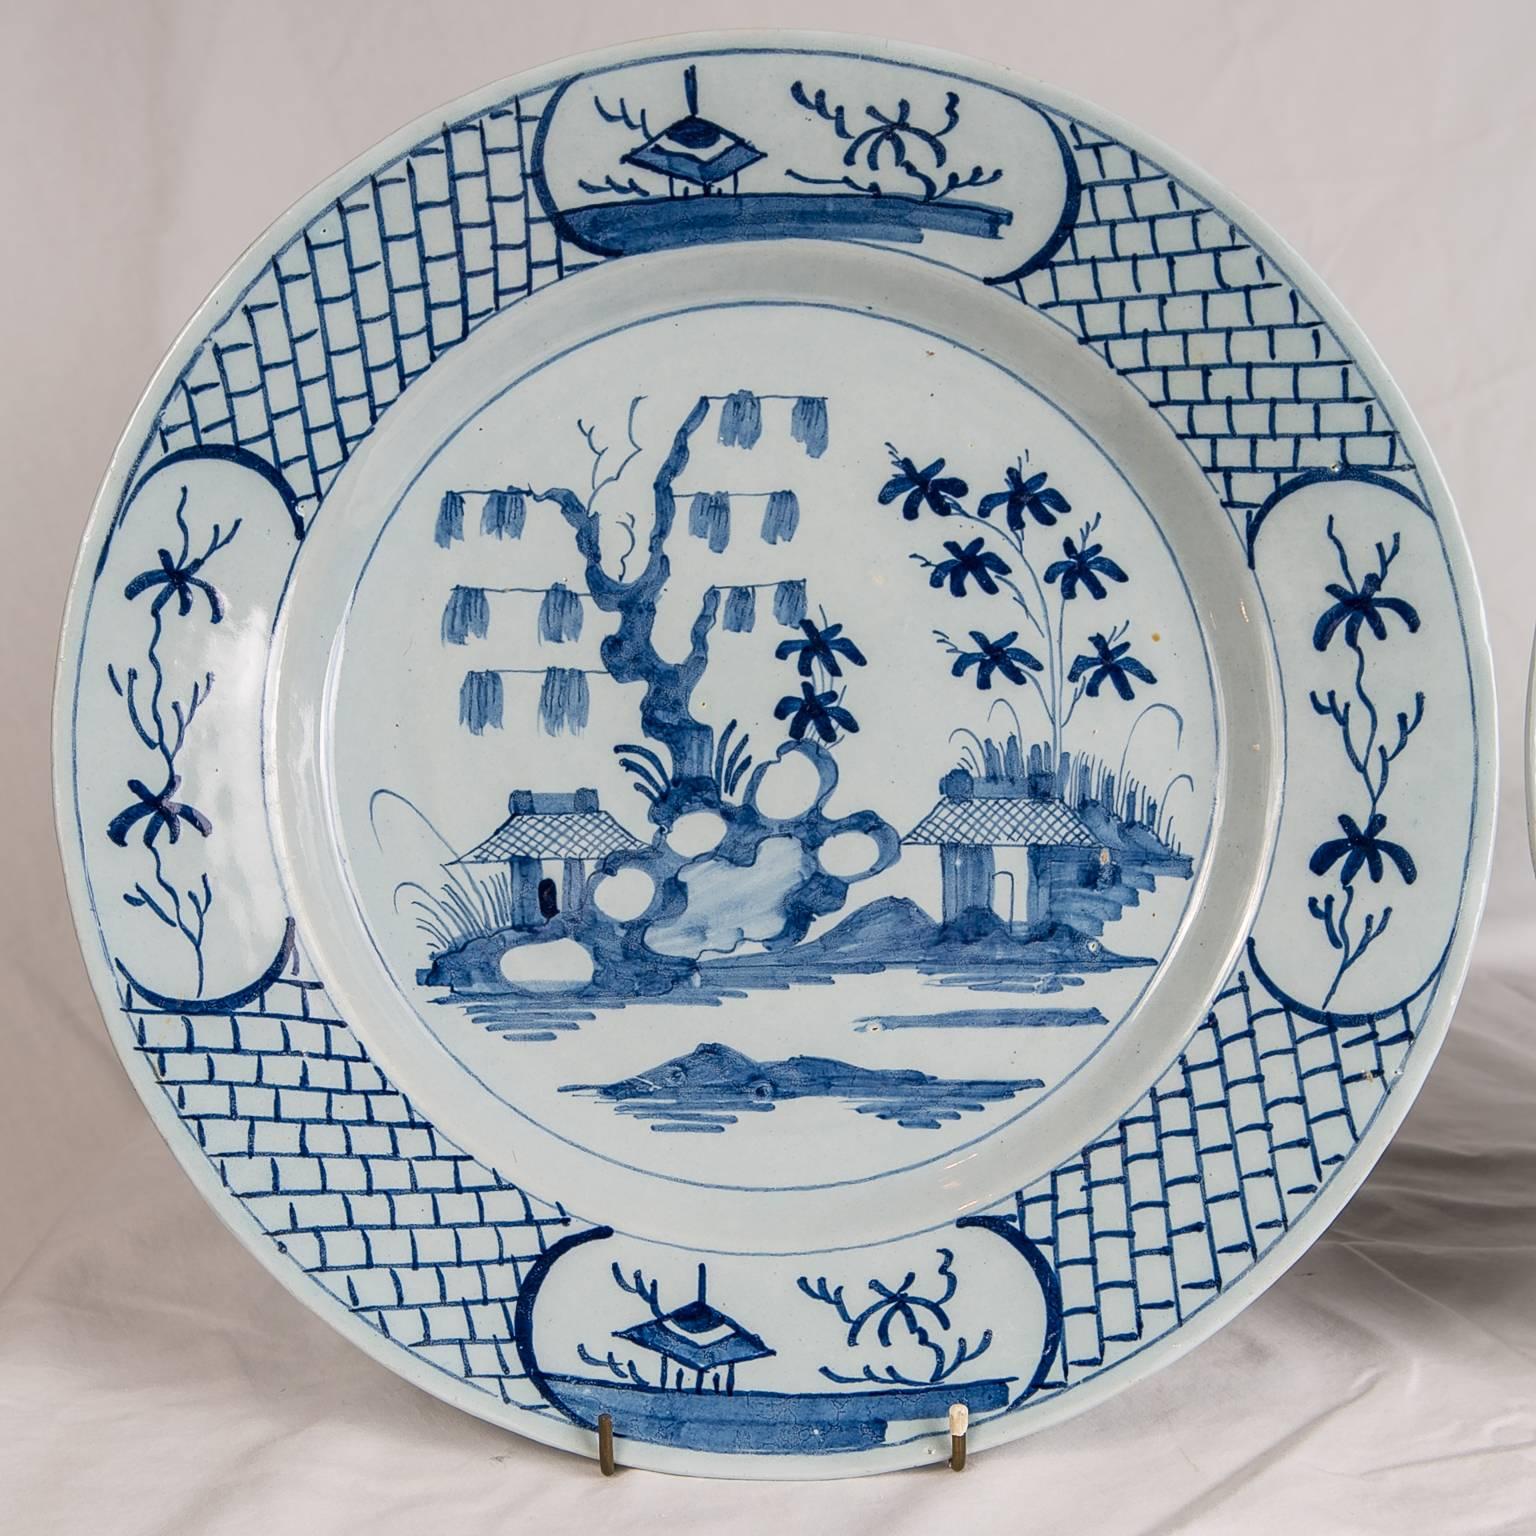 We are pleased to offer this pair of Delft blue and white chargers made in England circa 1760. They are painted in a beautiful soft cobalt blue showing traditional images of chinoiserie decoration: pagodas, flowering trees, and a rocky outcropping.